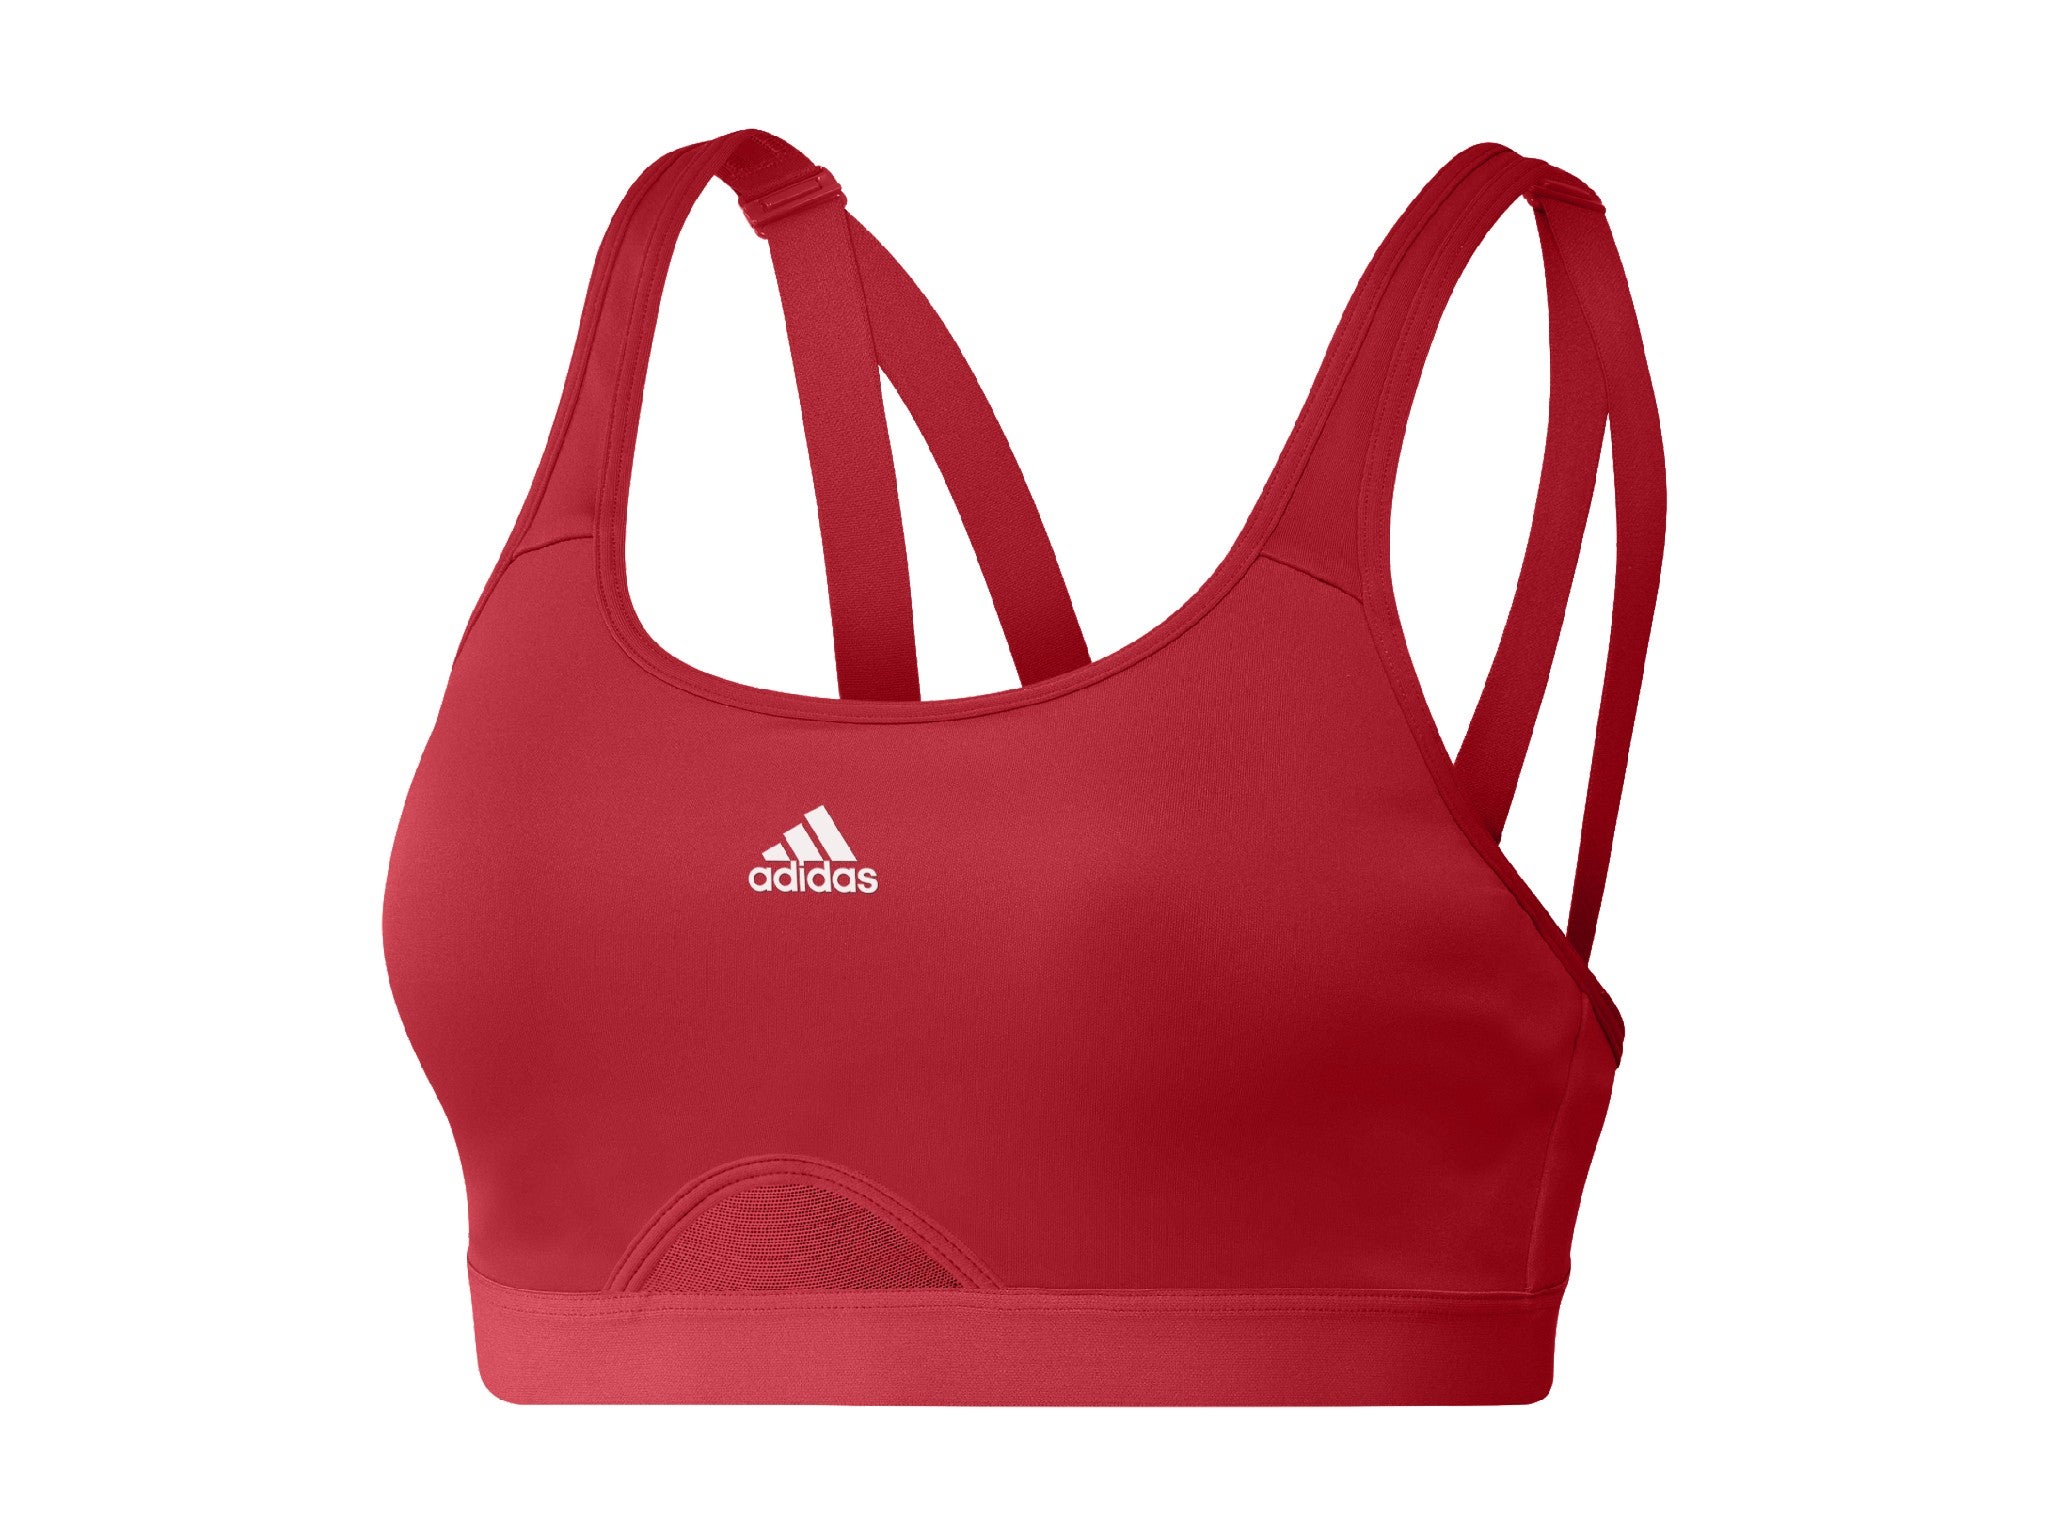 Adidas TLRD move training high-support bra indybest